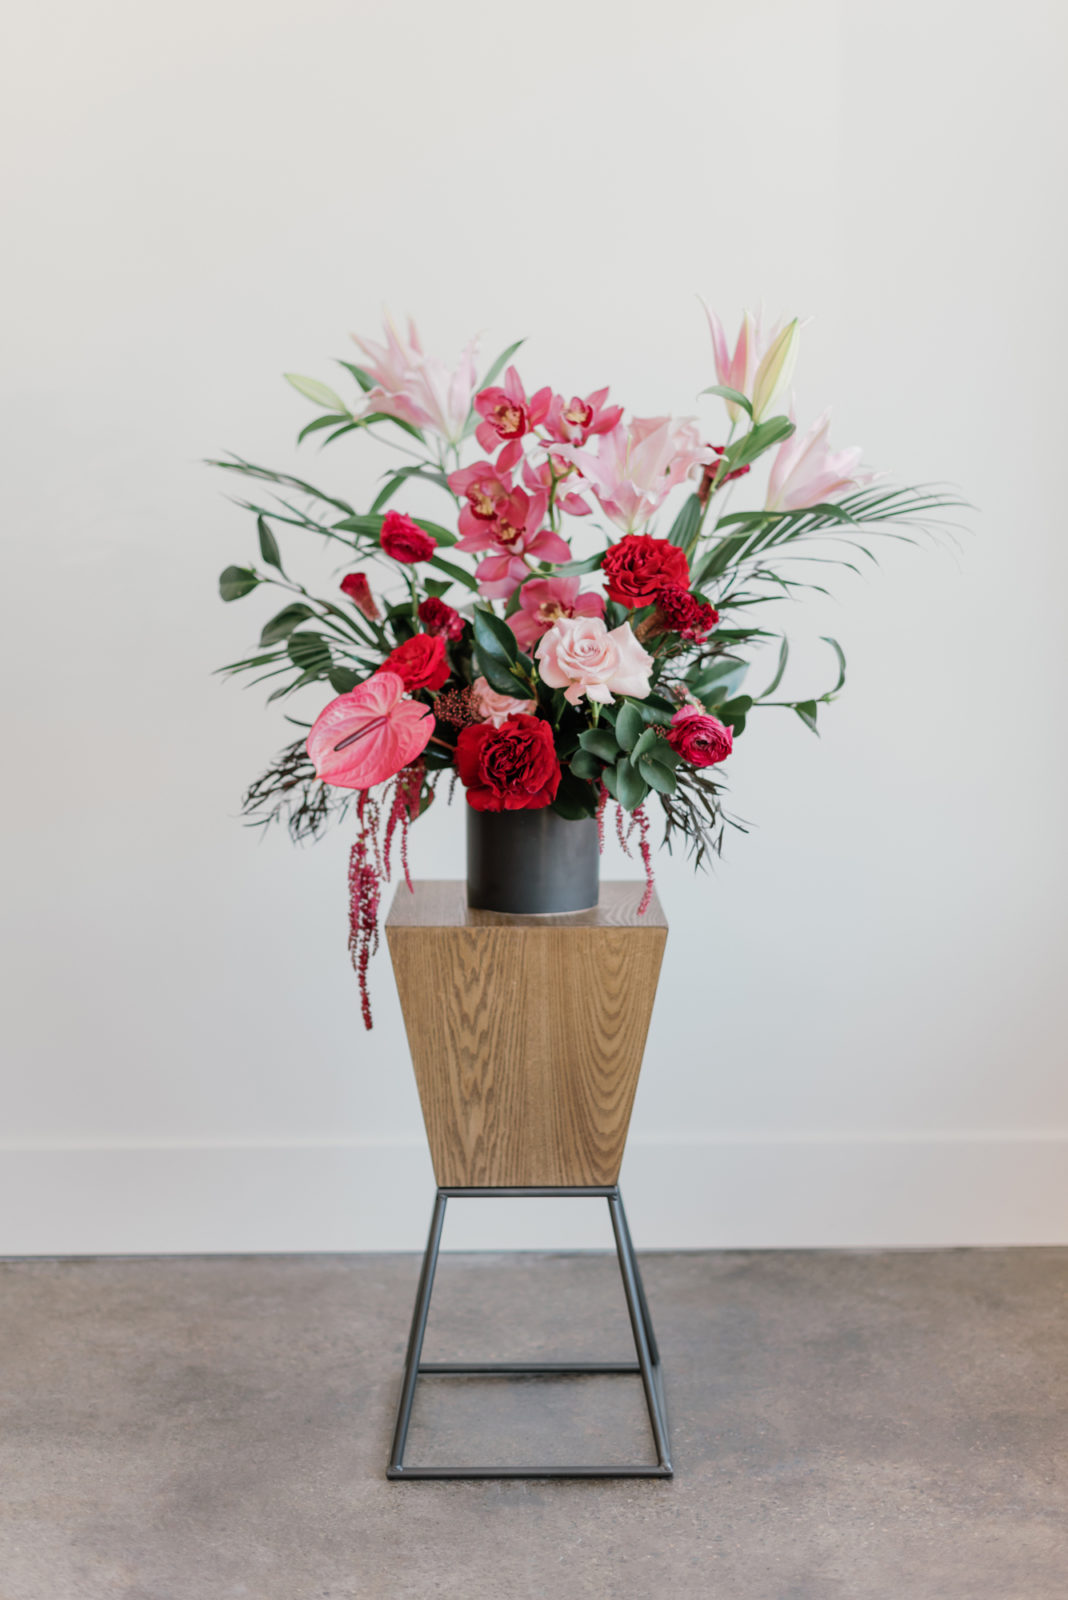 Pink, red, and white wedding floral arrangement inspiration for the modern bride and groom